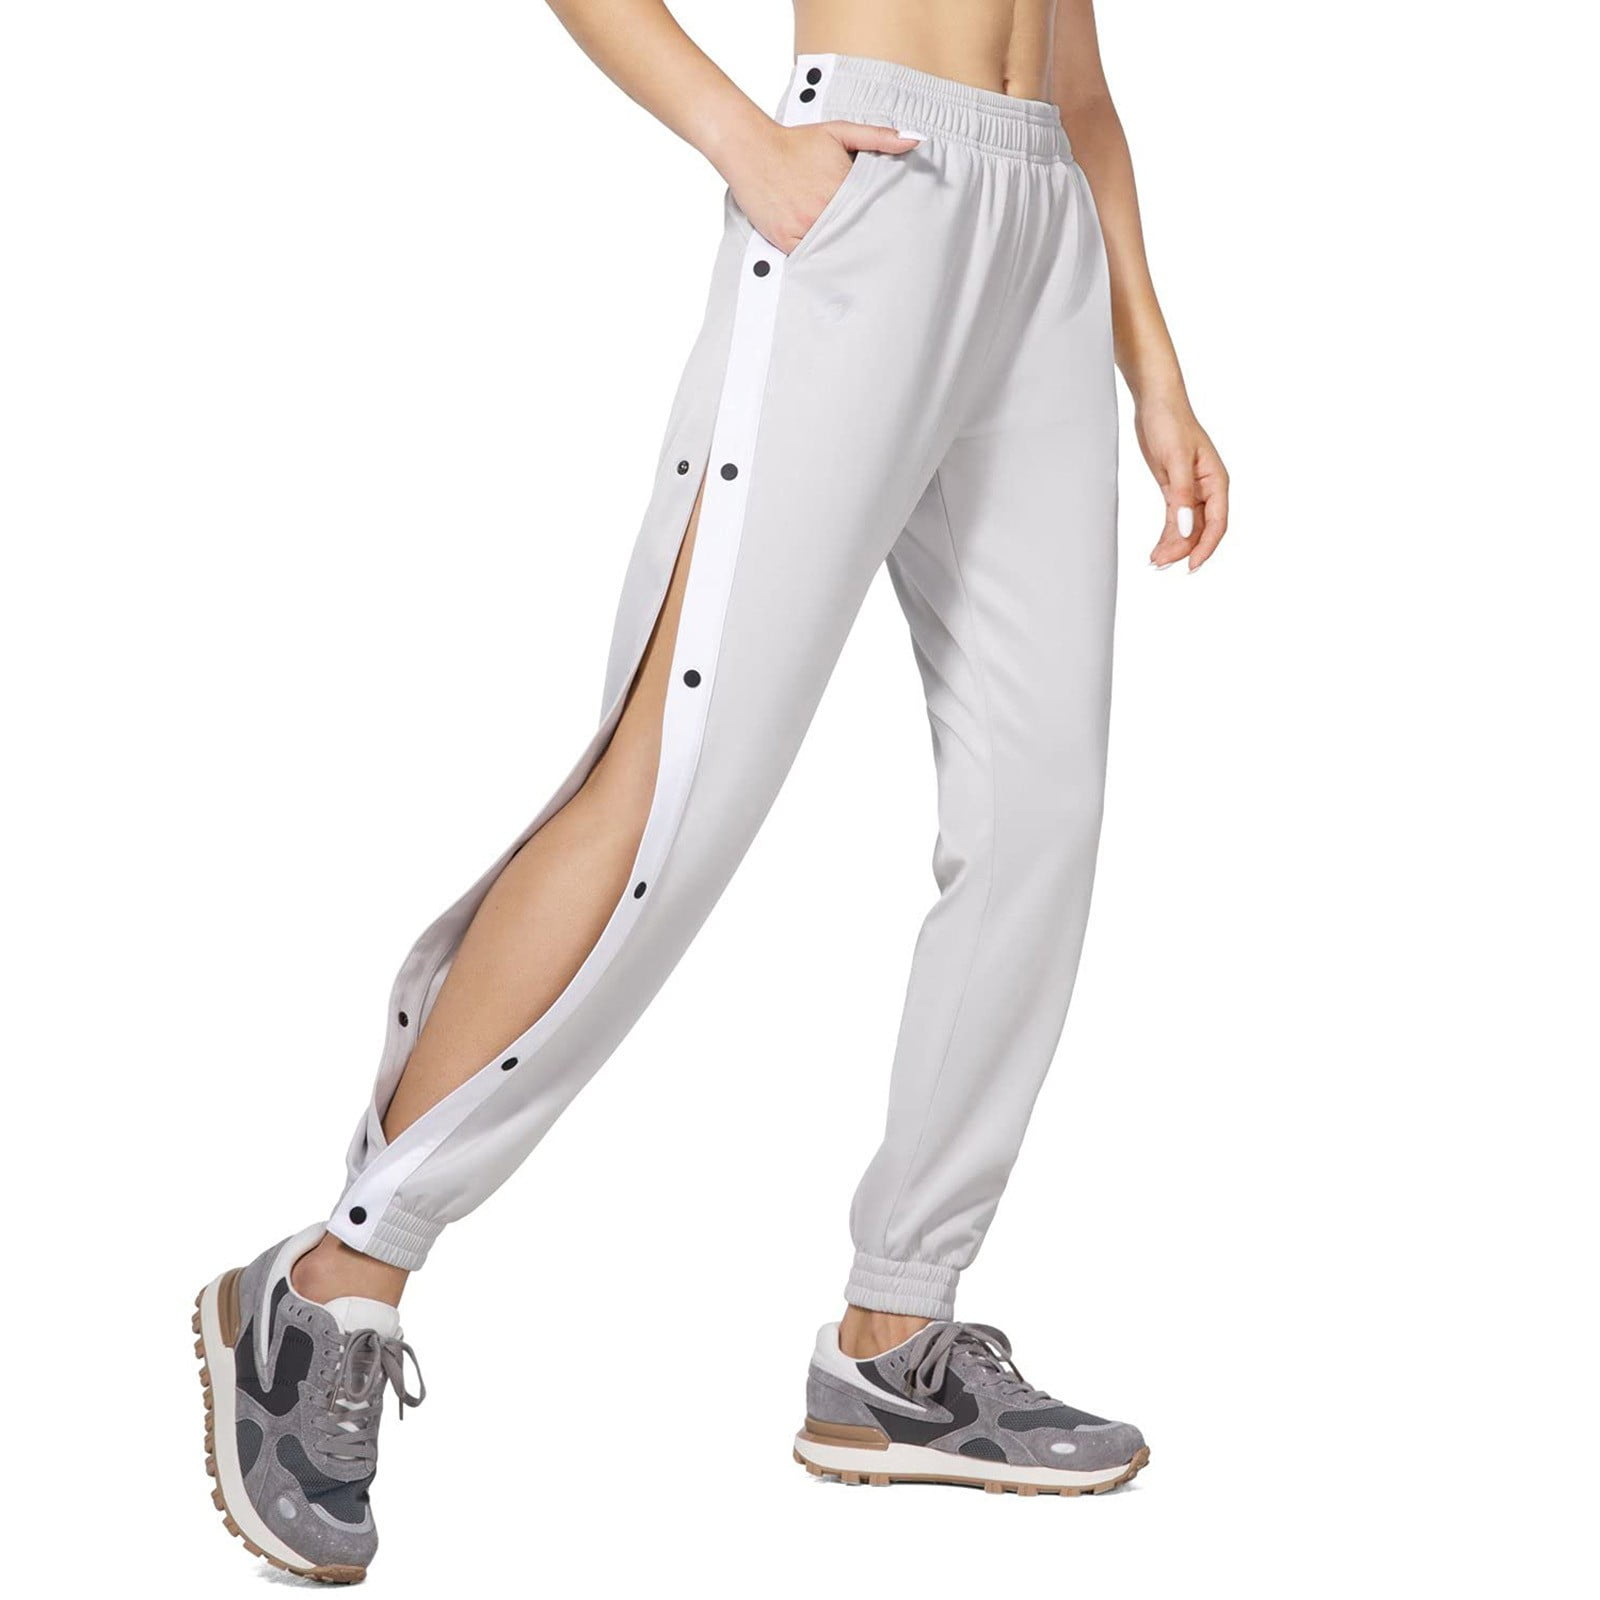 ZMHEGW Women's Tear Away Warm Up Pants Active Workout Tapered Sweatpants  With Pockets